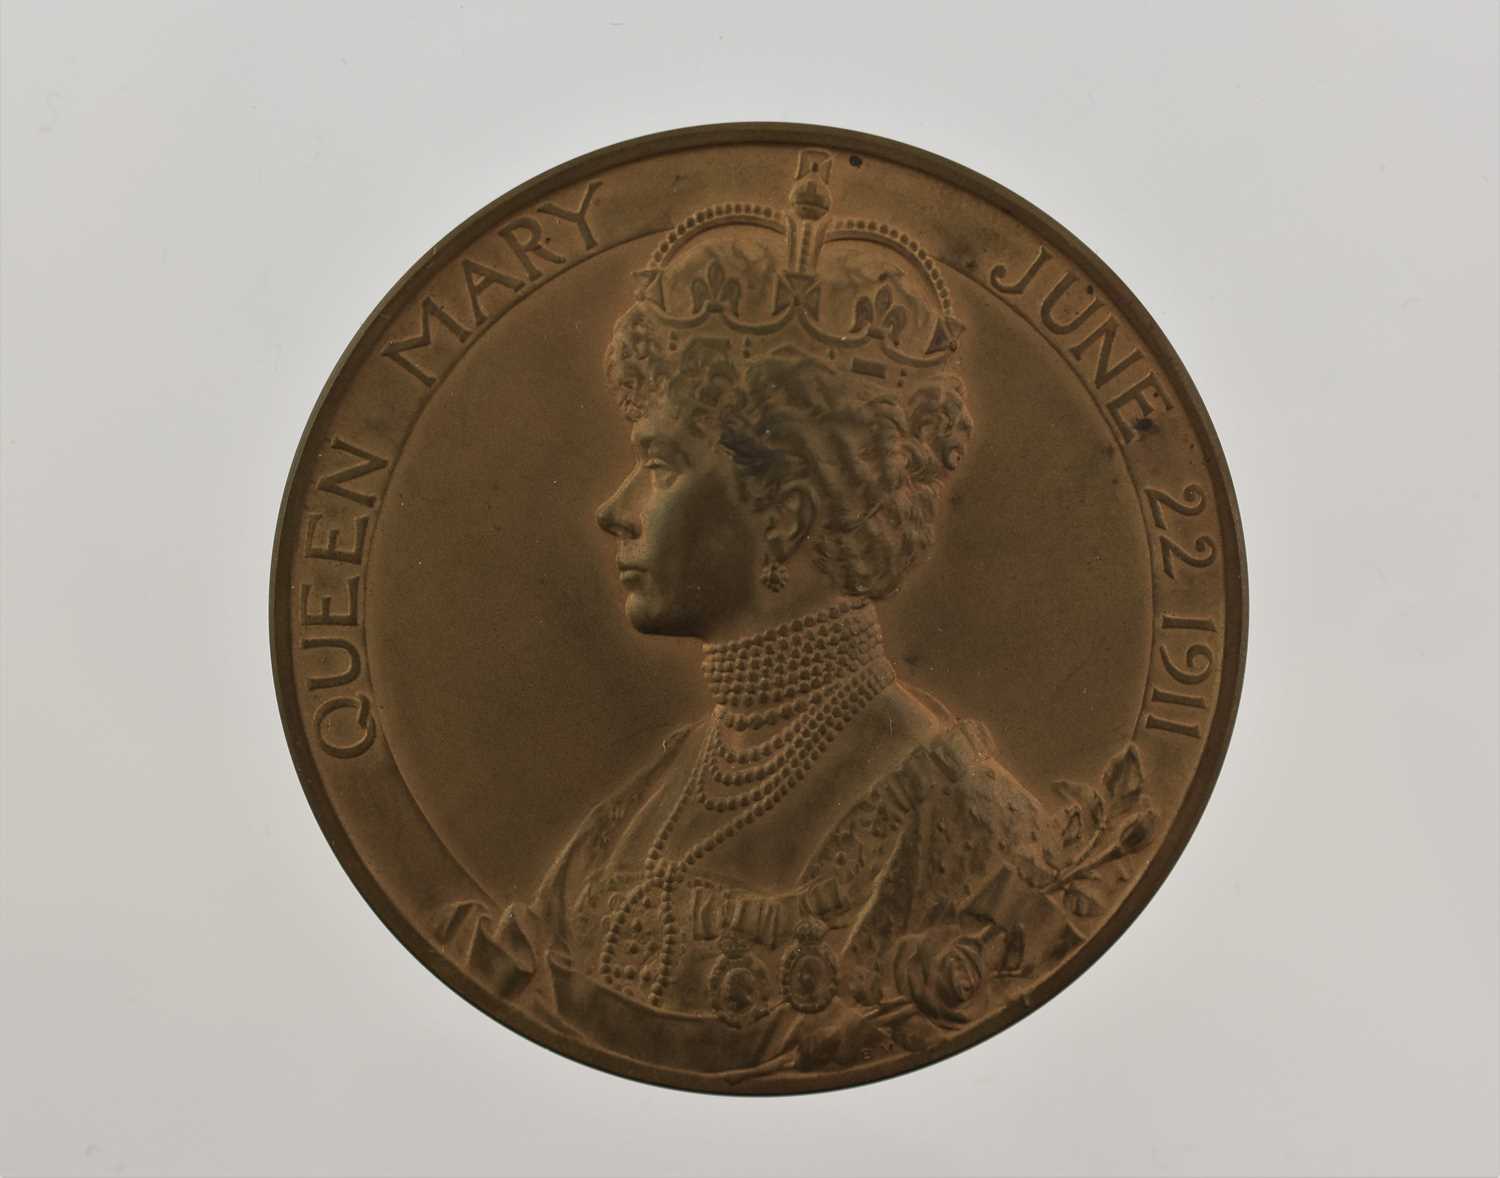 4 x Coronation Medals, comprising: Edward VII AE 1902 (55.5mm, 81.86g), obv. EDWARD VII CORWNED 9 - Image 6 of 6